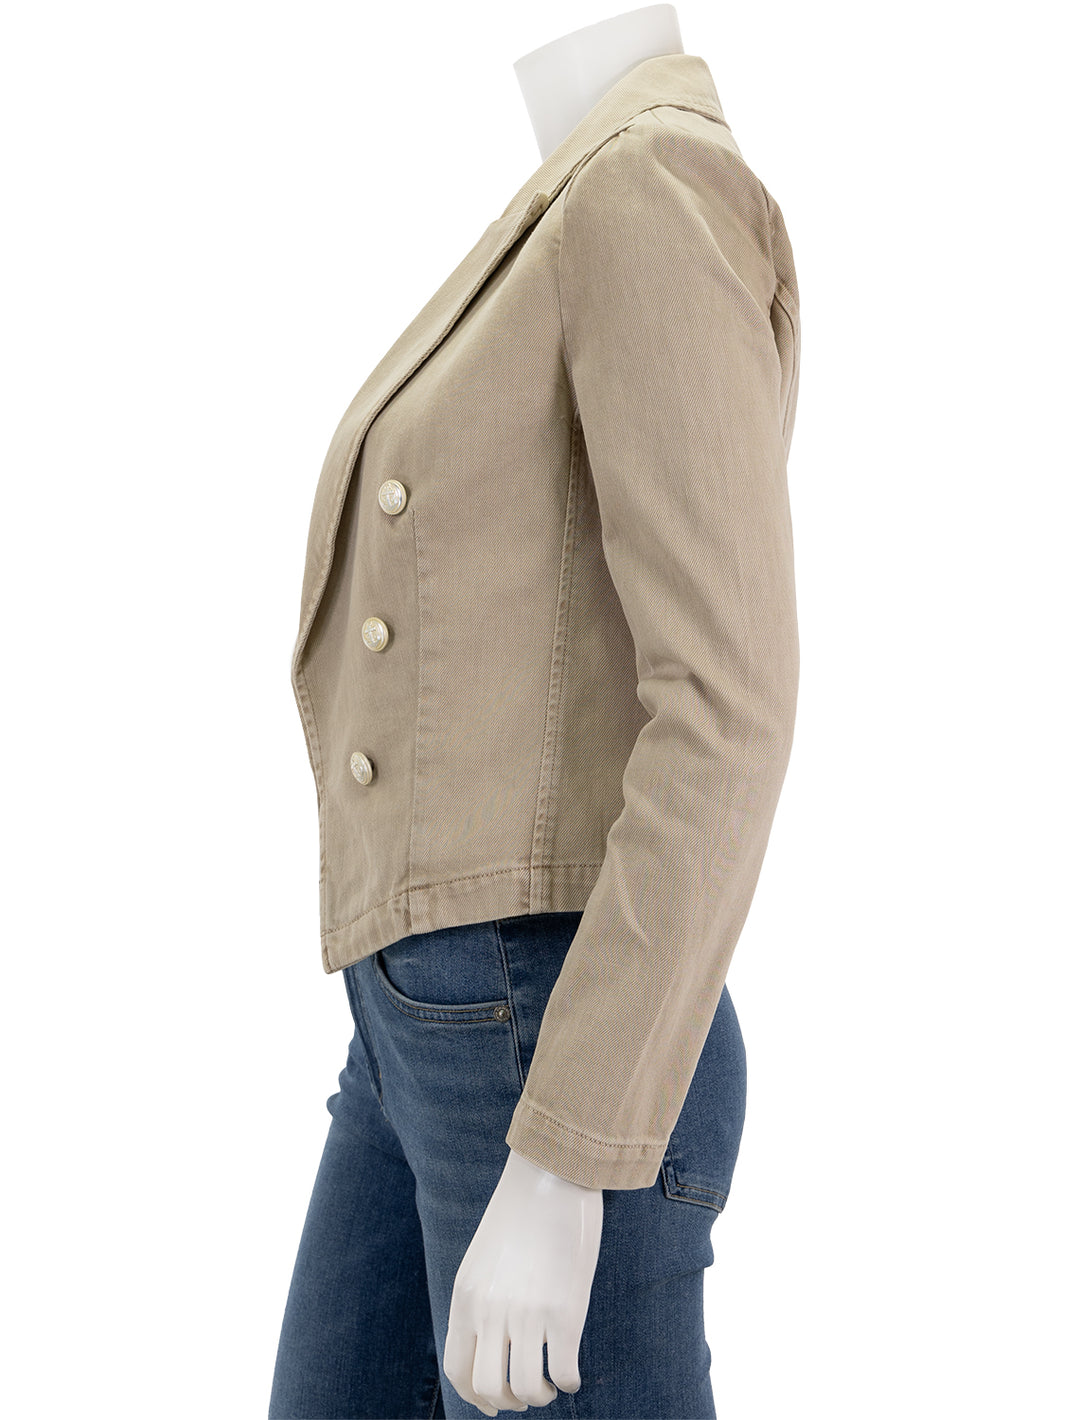 Side view of L'agence's wayne crop jacket in sand dune.